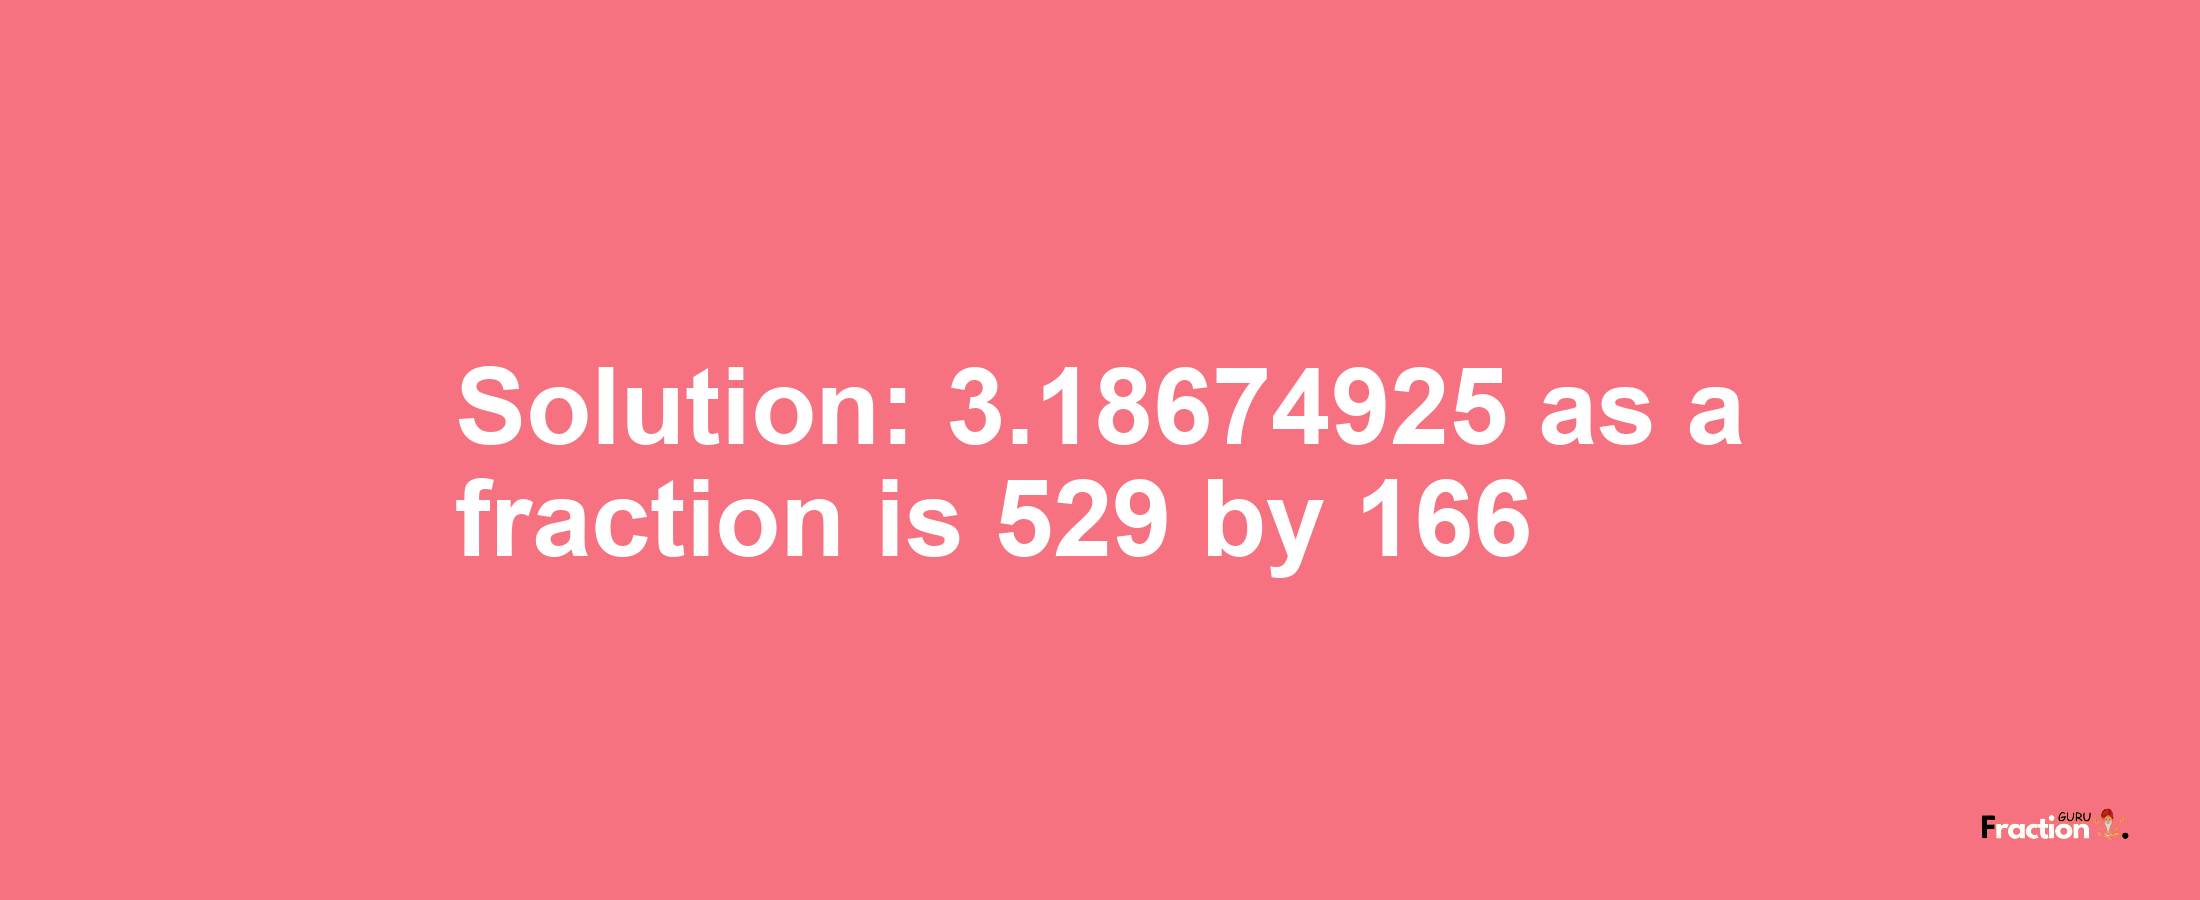 Solution:3.18674925 as a fraction is 529/166